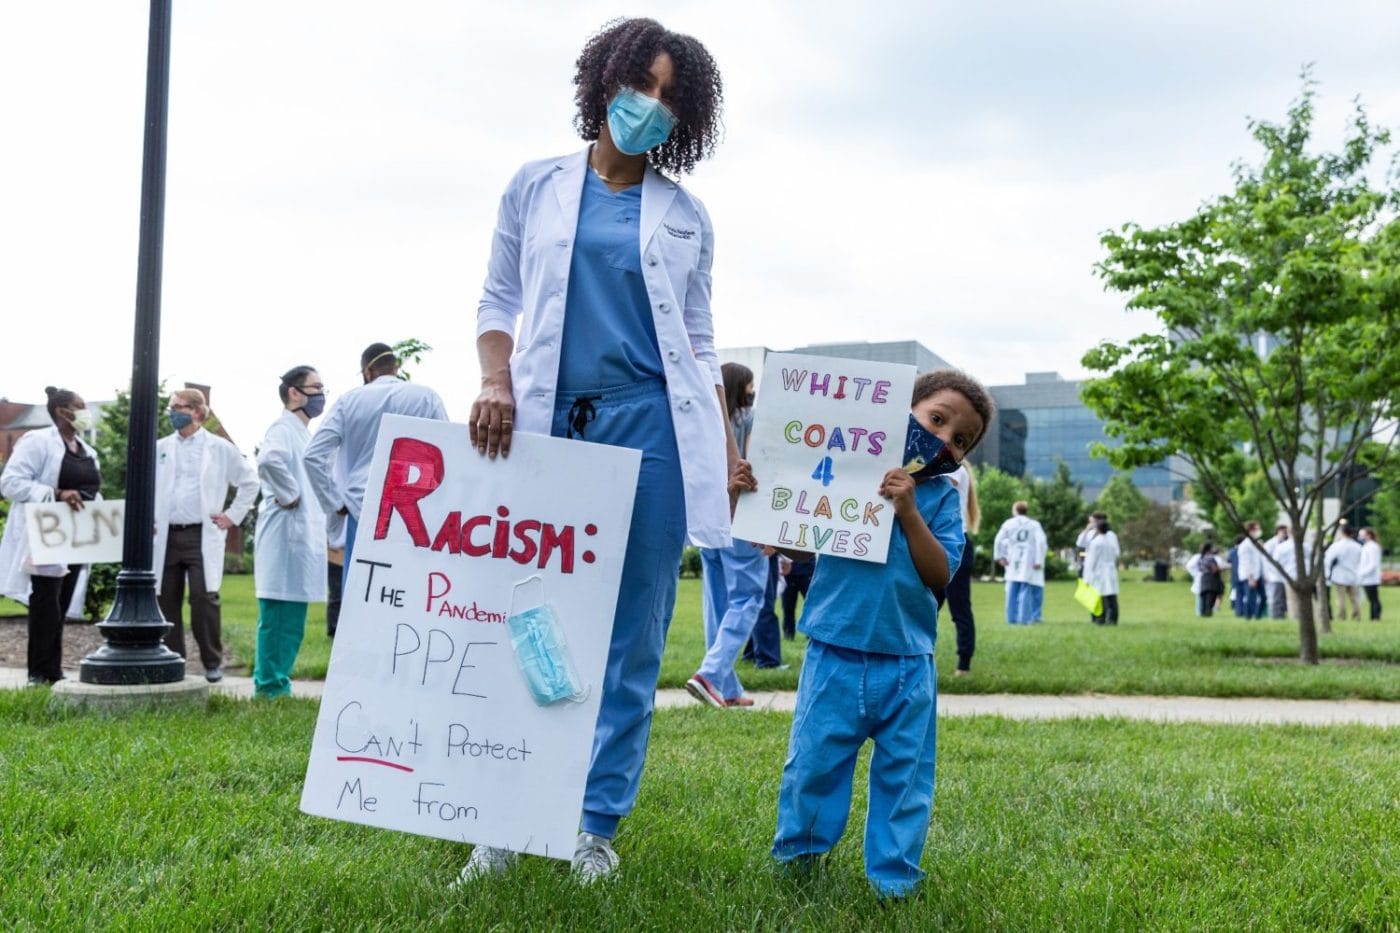 White-Coats-for-Black-Lives-rally-Indiana-University-060320-by-Liz-Kaye-1400x933, We need each other, World News & Views 